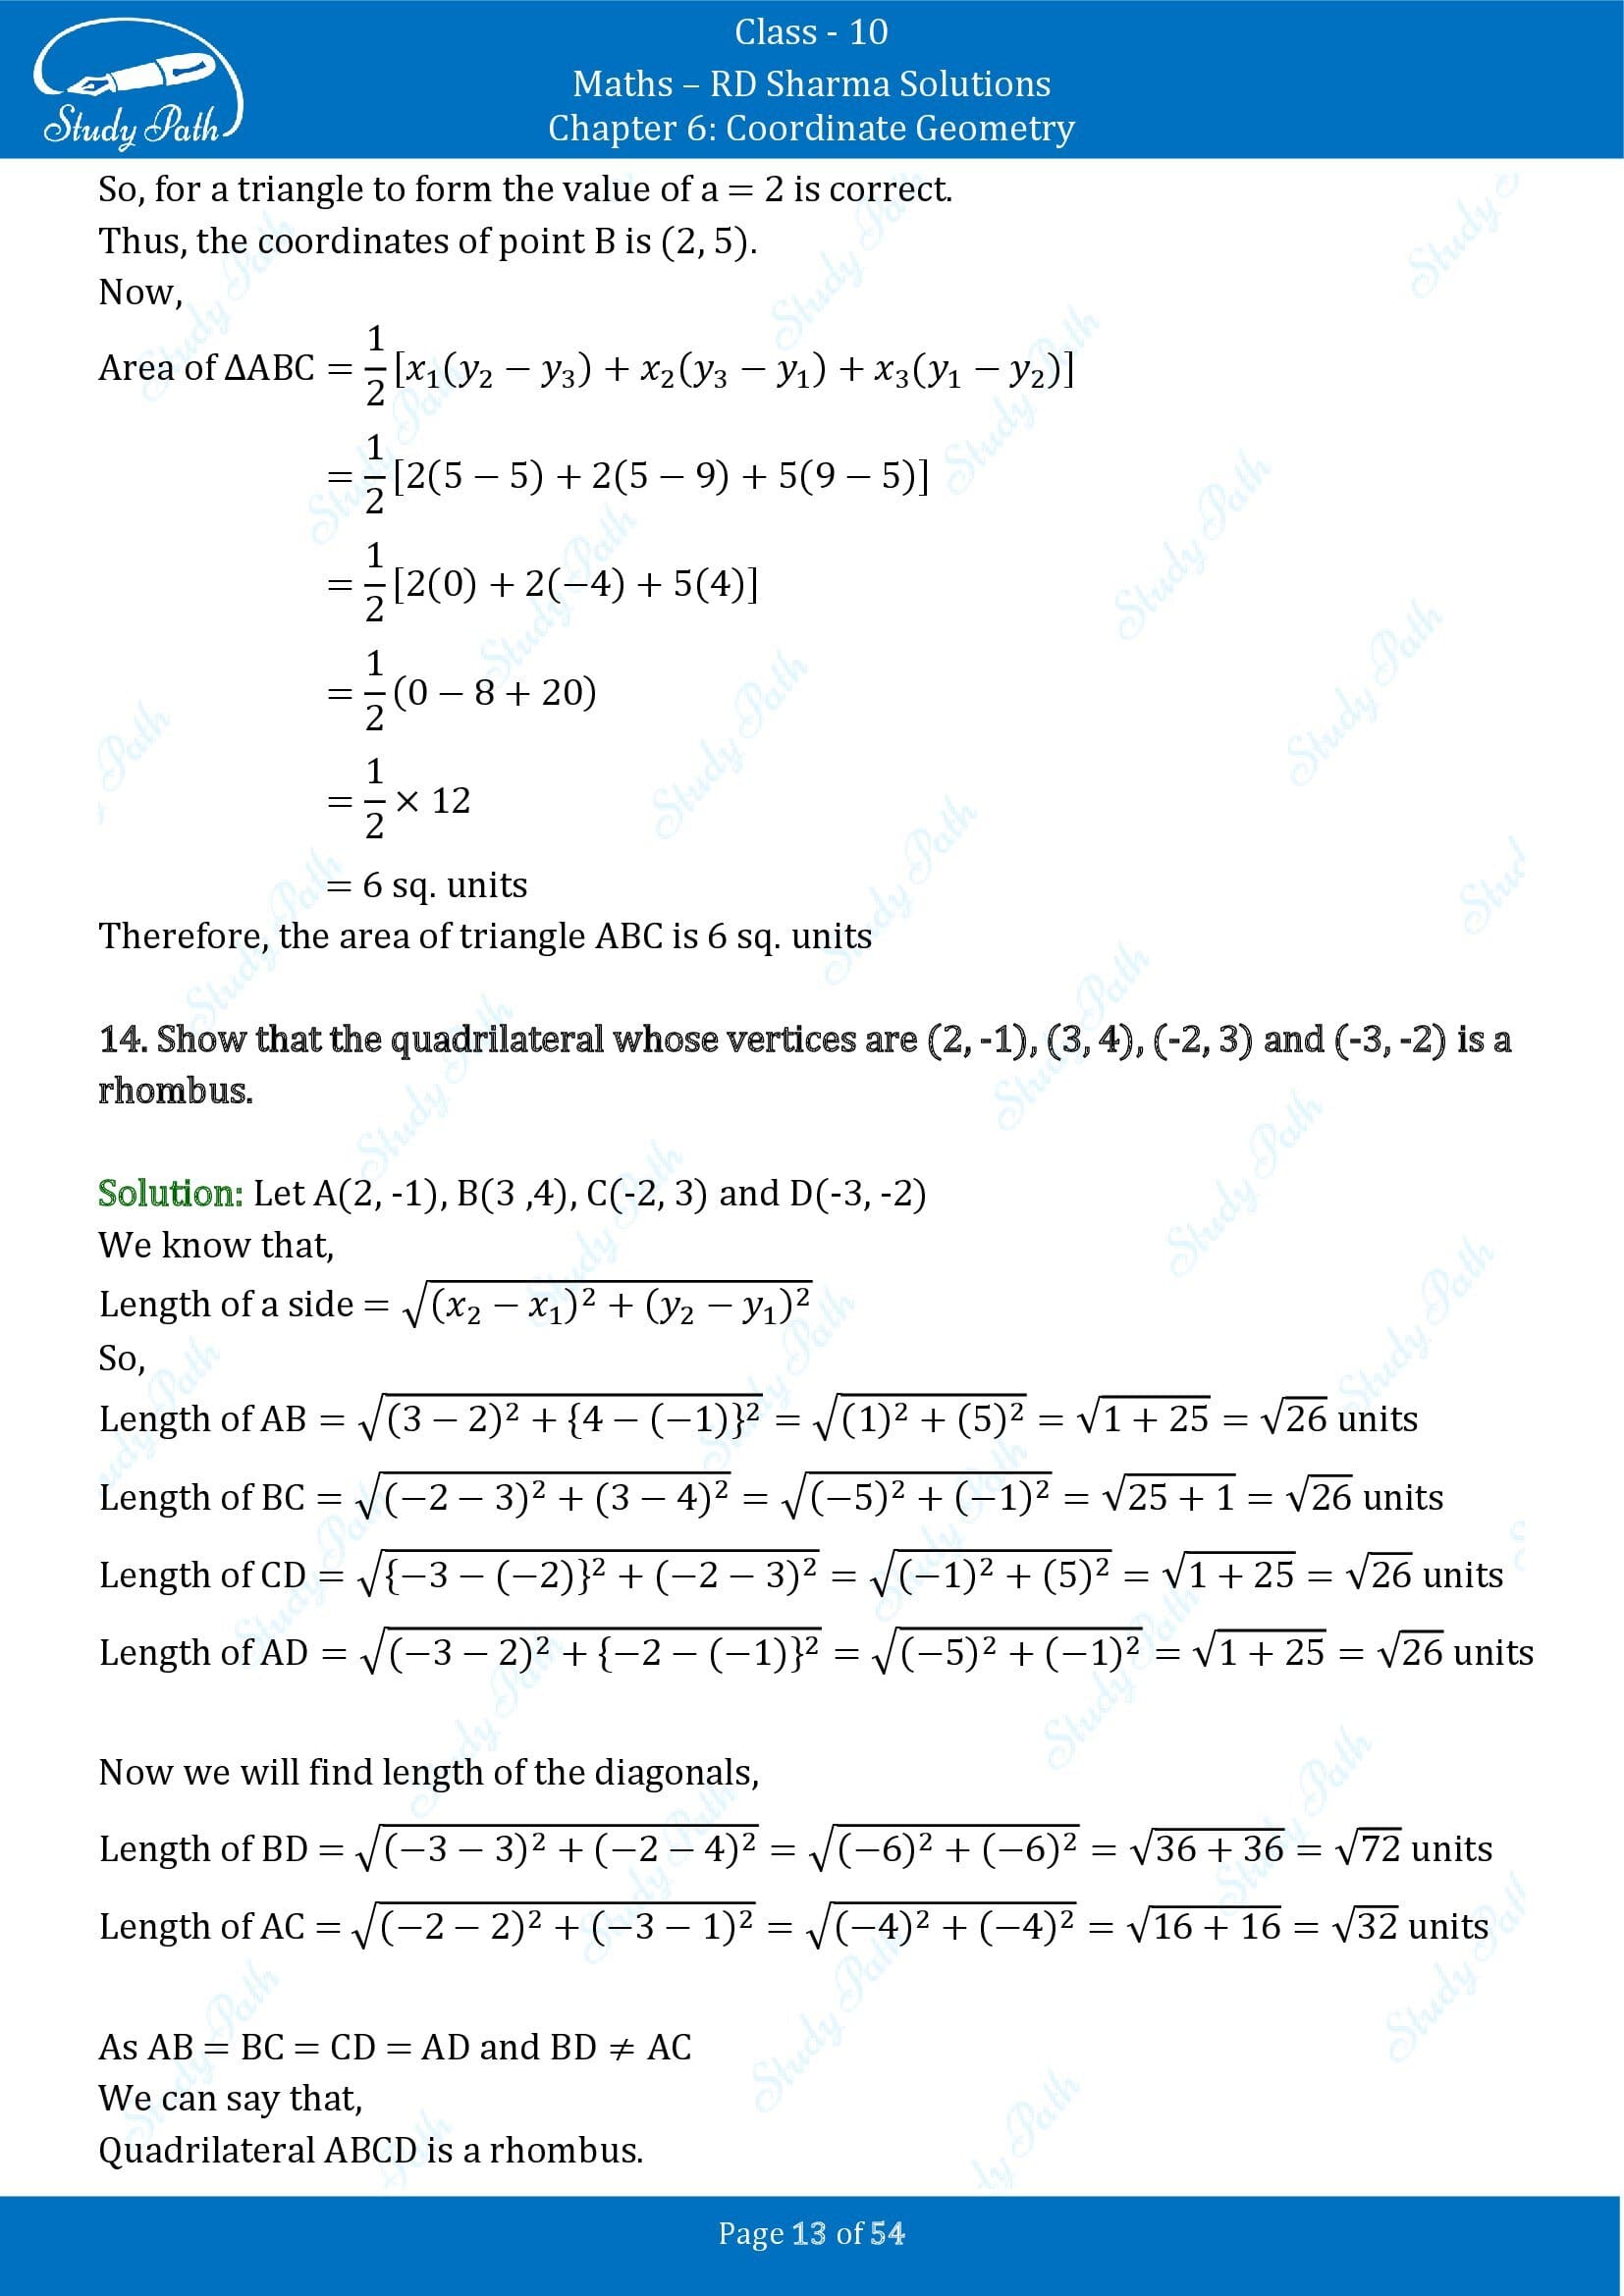 RD Sharma Solutions Class 10 Chapter 6 Coordinate Geometry Exercise 6.2 0013